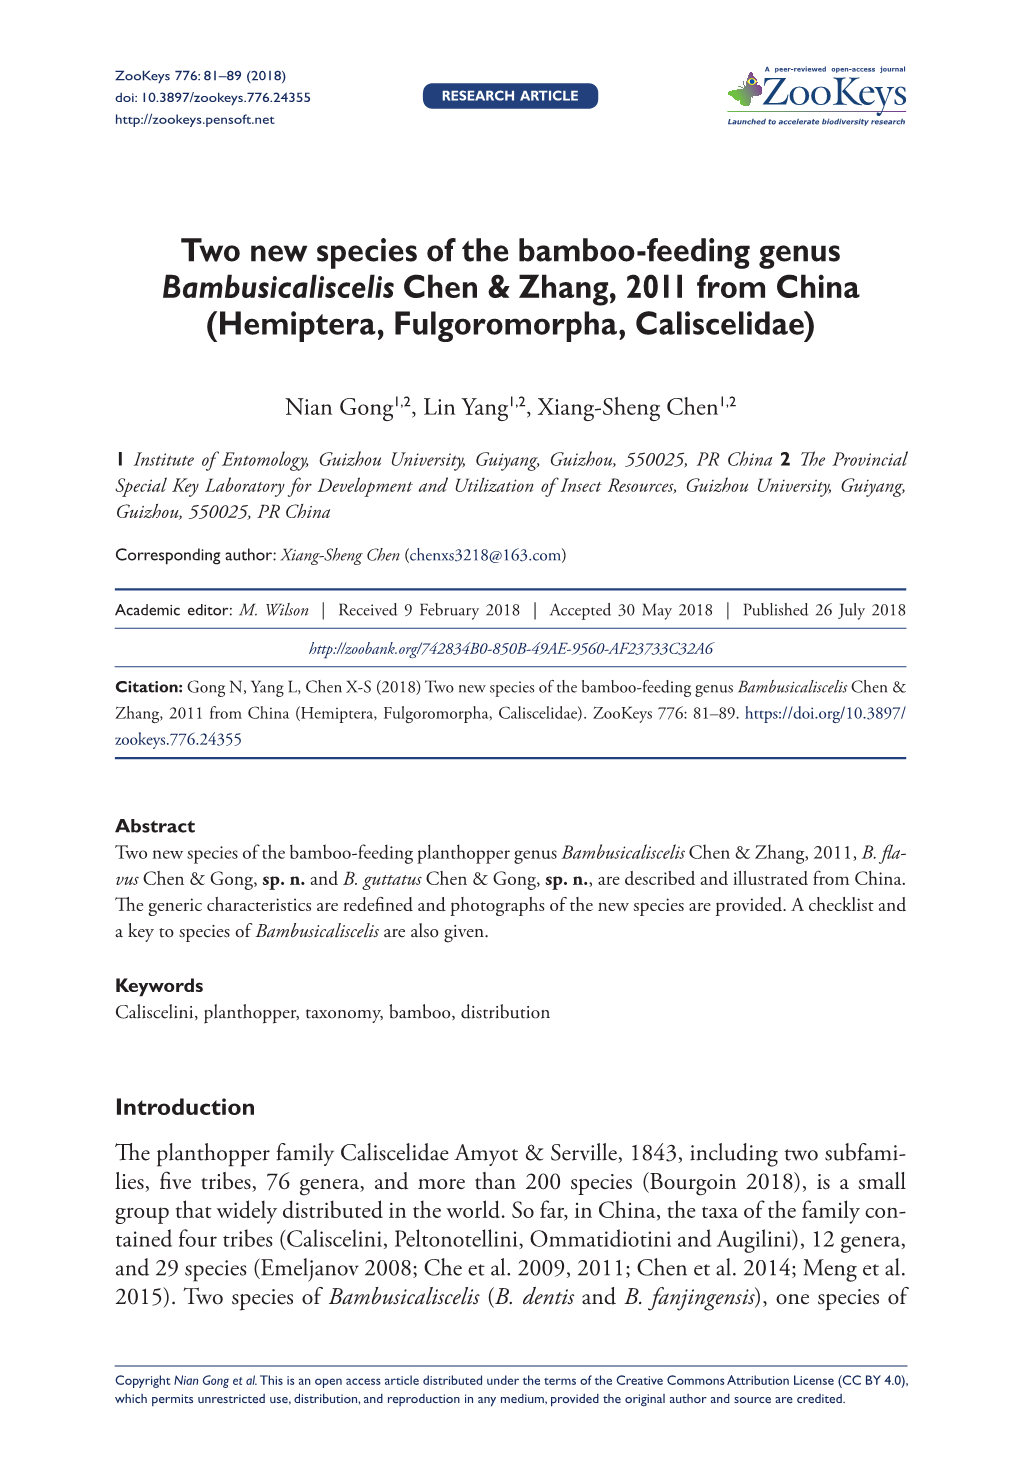 ﻿Two New Species of the Bamboo-Feeding Genus